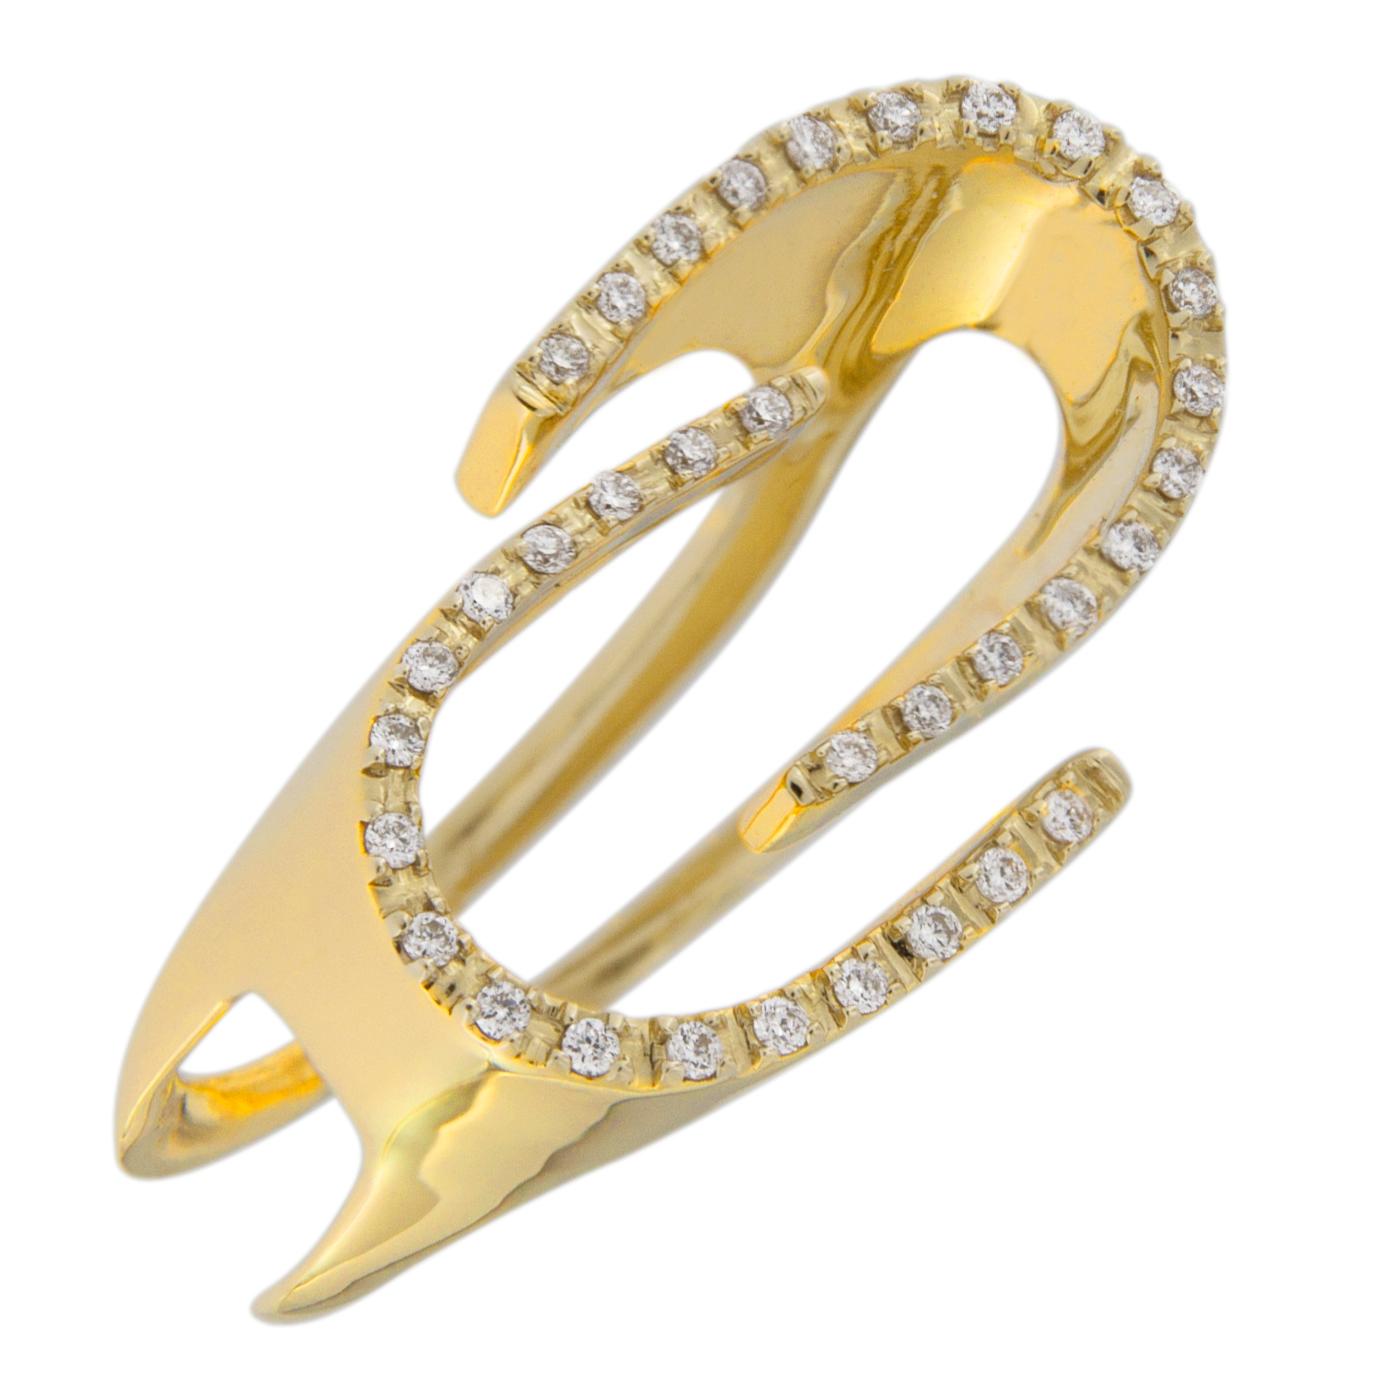 Jona design collection, hand crafted in Italy, 18 Karat yellow gold ring, set with 0.18 carats of white diamonds.  US size 6, can be sized to any specification.
All Jona jewelry is new and has never been previously owned or worn. Each item will